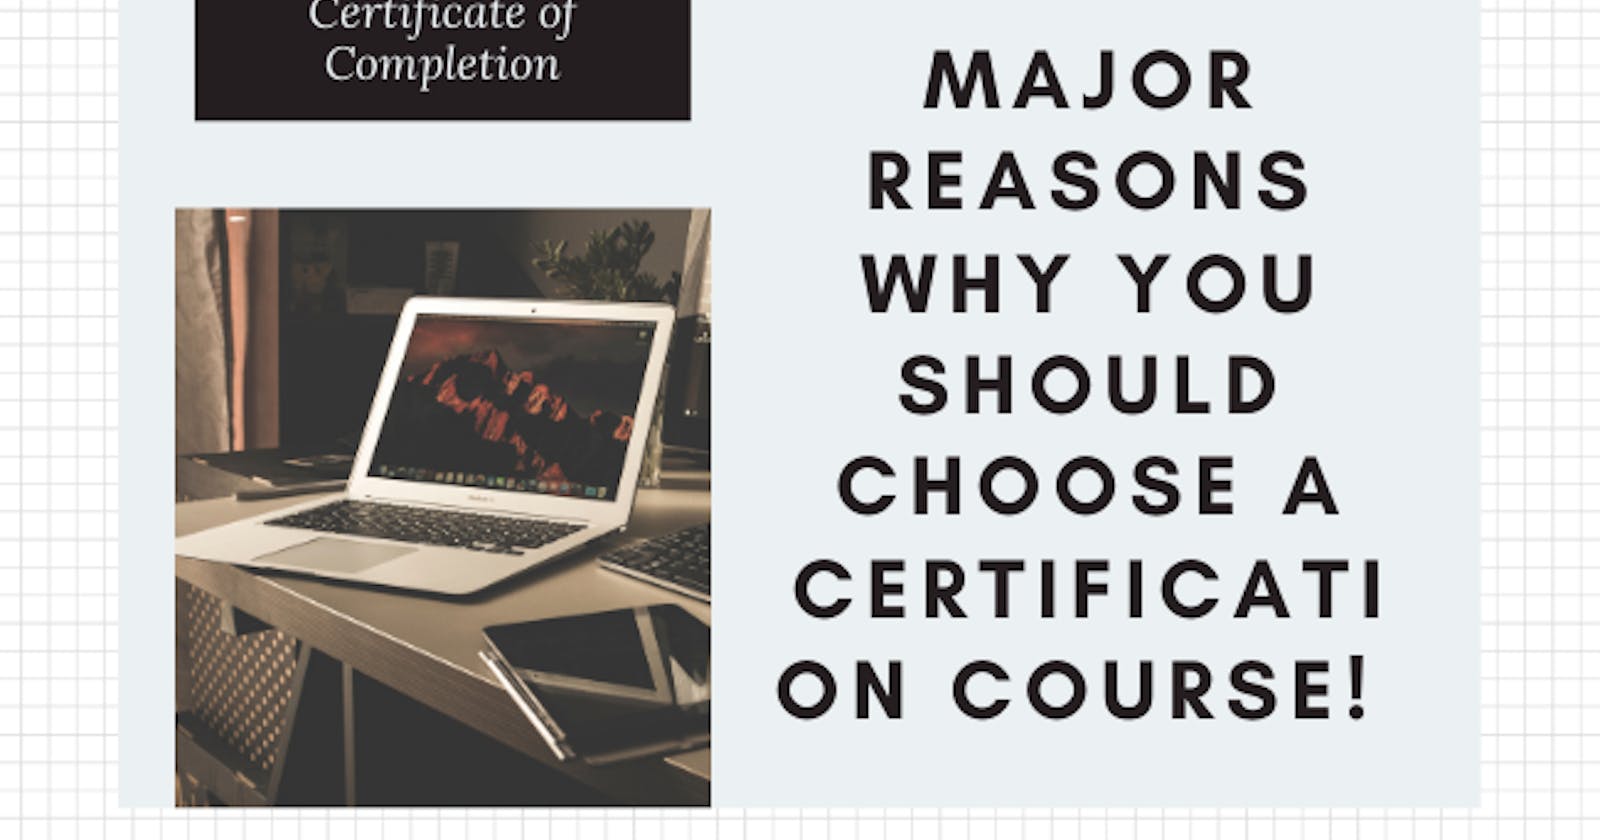 Major reasons why you should choose a certification course!